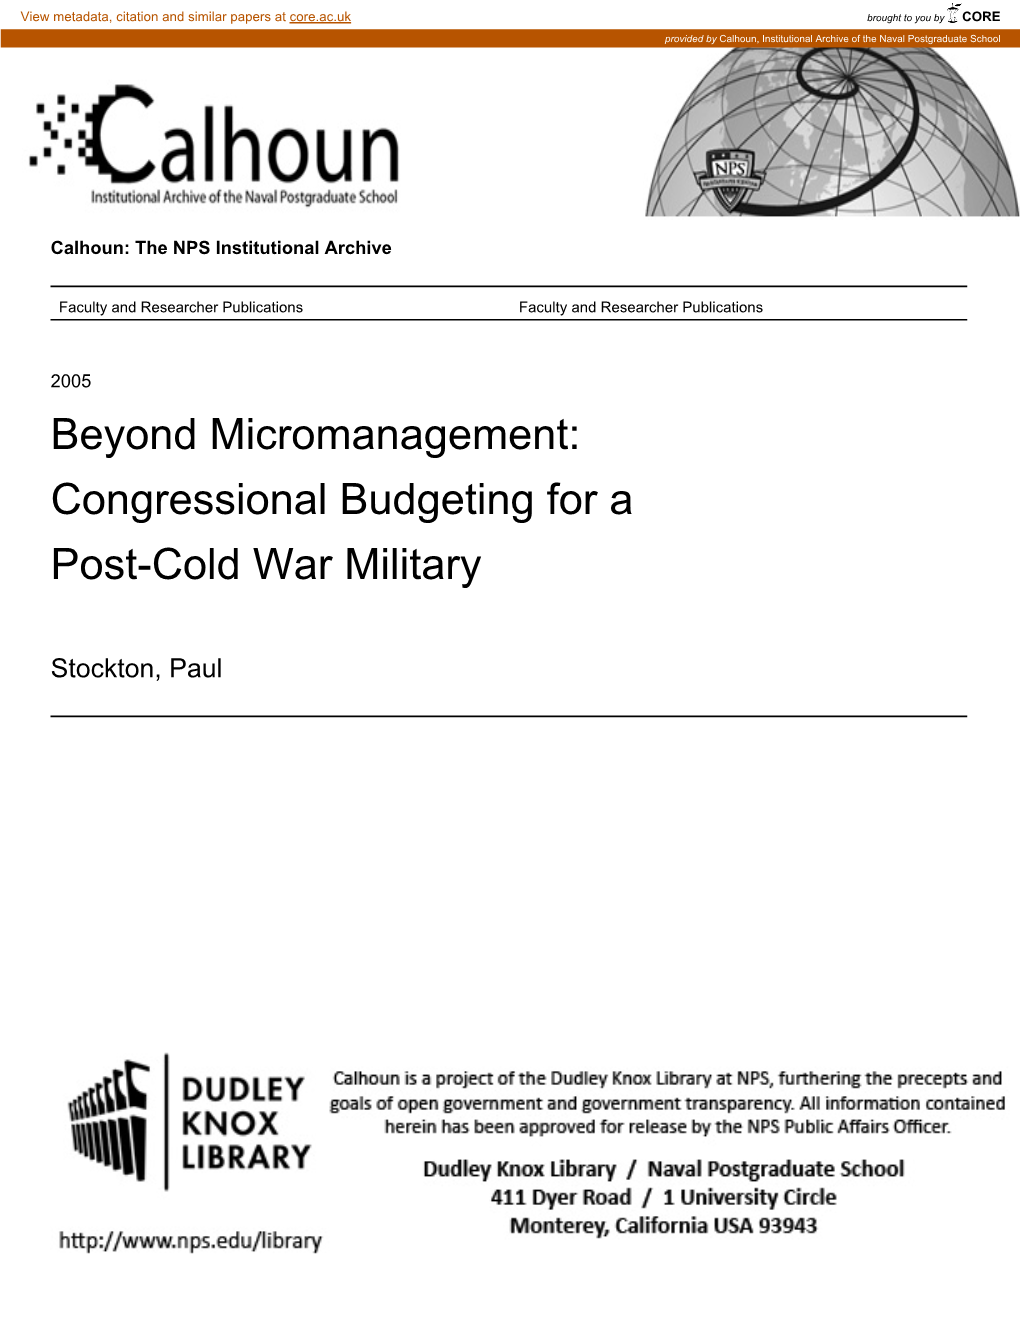 Congressional Budgeting for a Post-Cold War Military